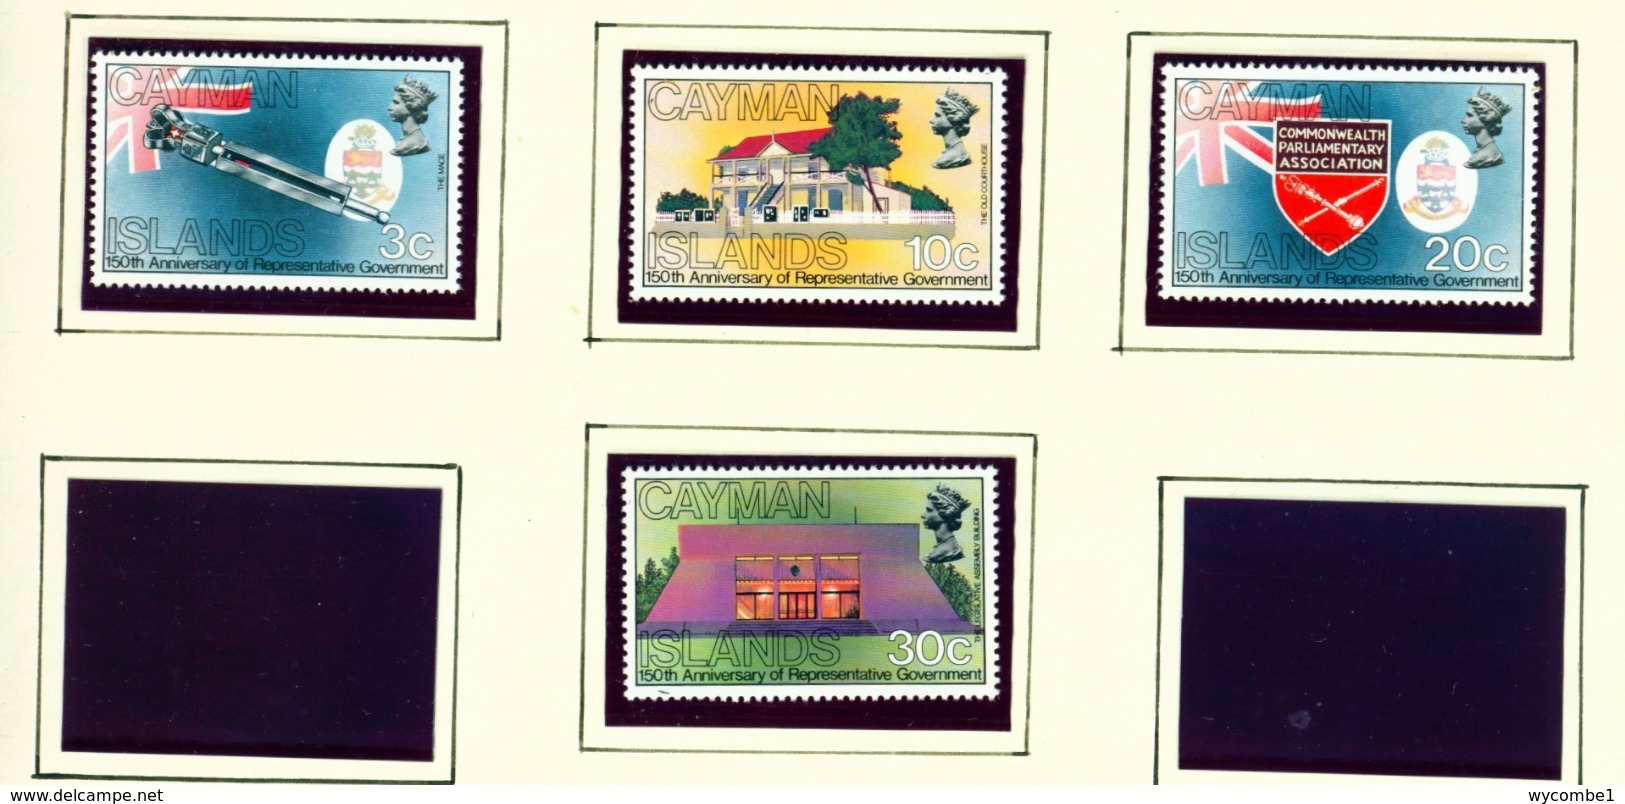 CAYMAN ISLANDS - 1982 Representative Government Set Unmounted/Never Hinged Mint - Cayman Islands